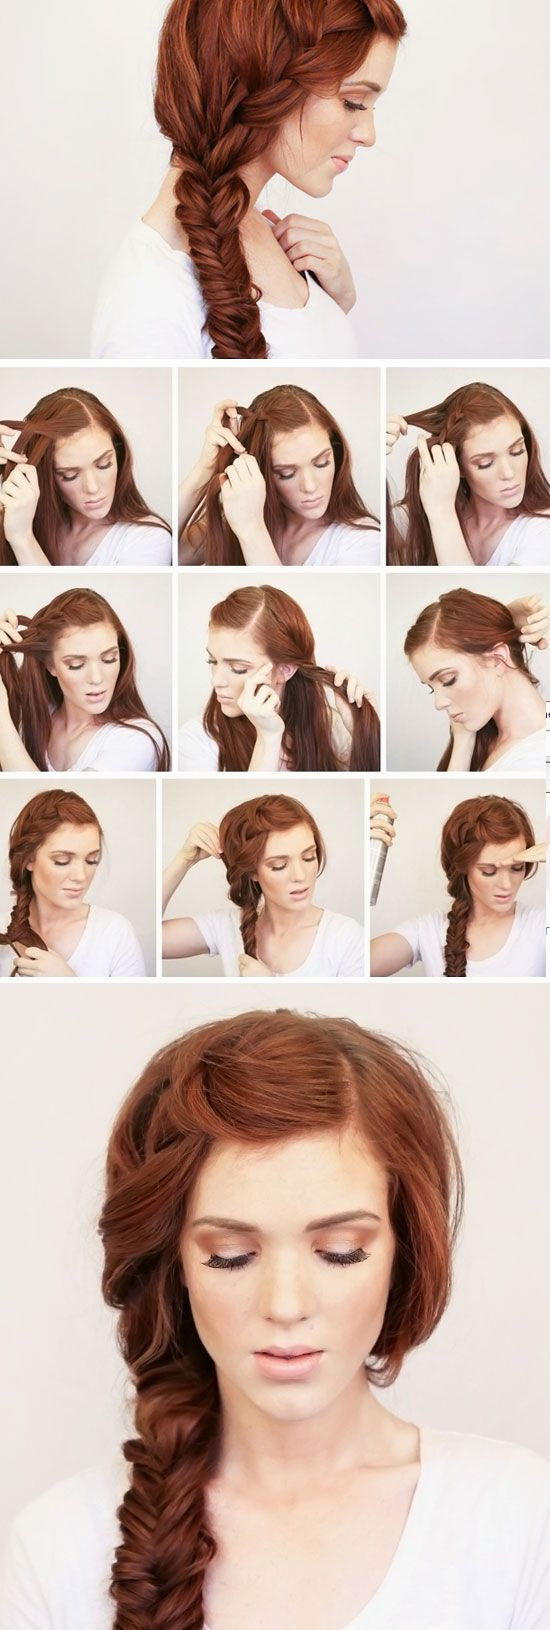 Easy Winter Hairstyles
 2646 best images about Hair Style on Pinterest